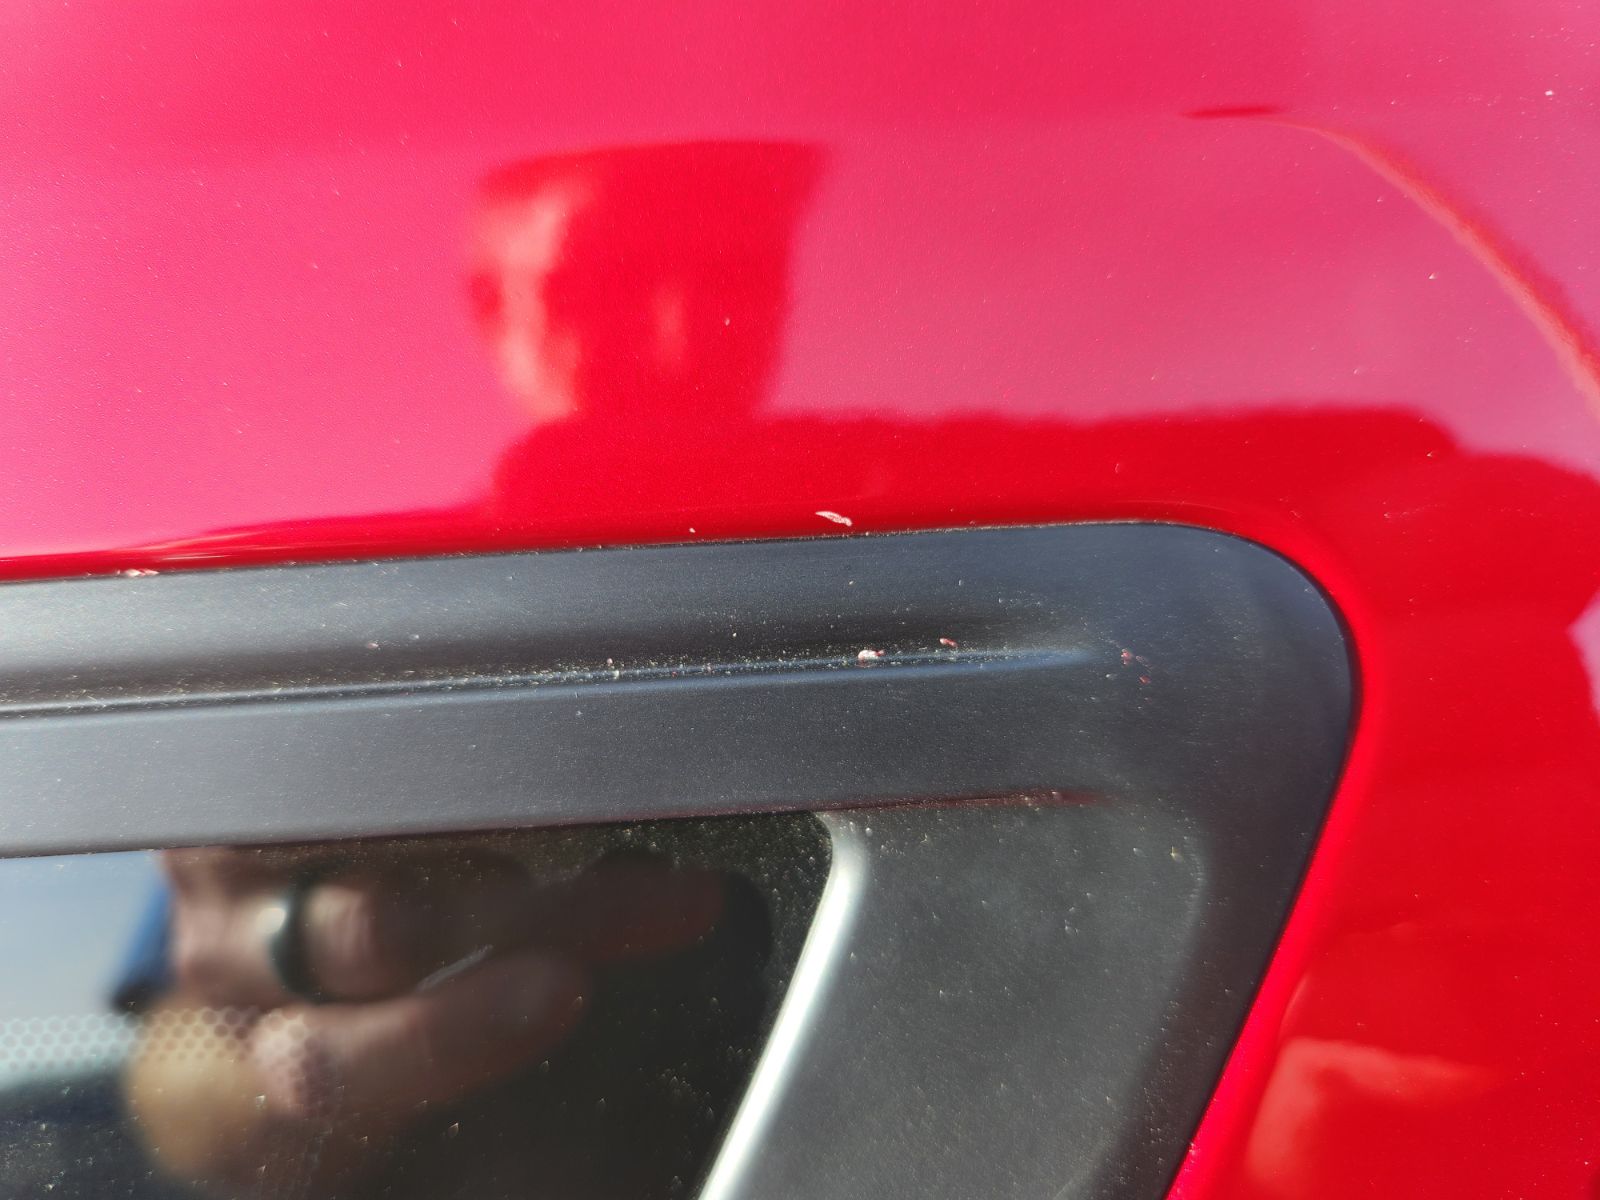 S650 Mustang Window scratched before delivery and repair image000000